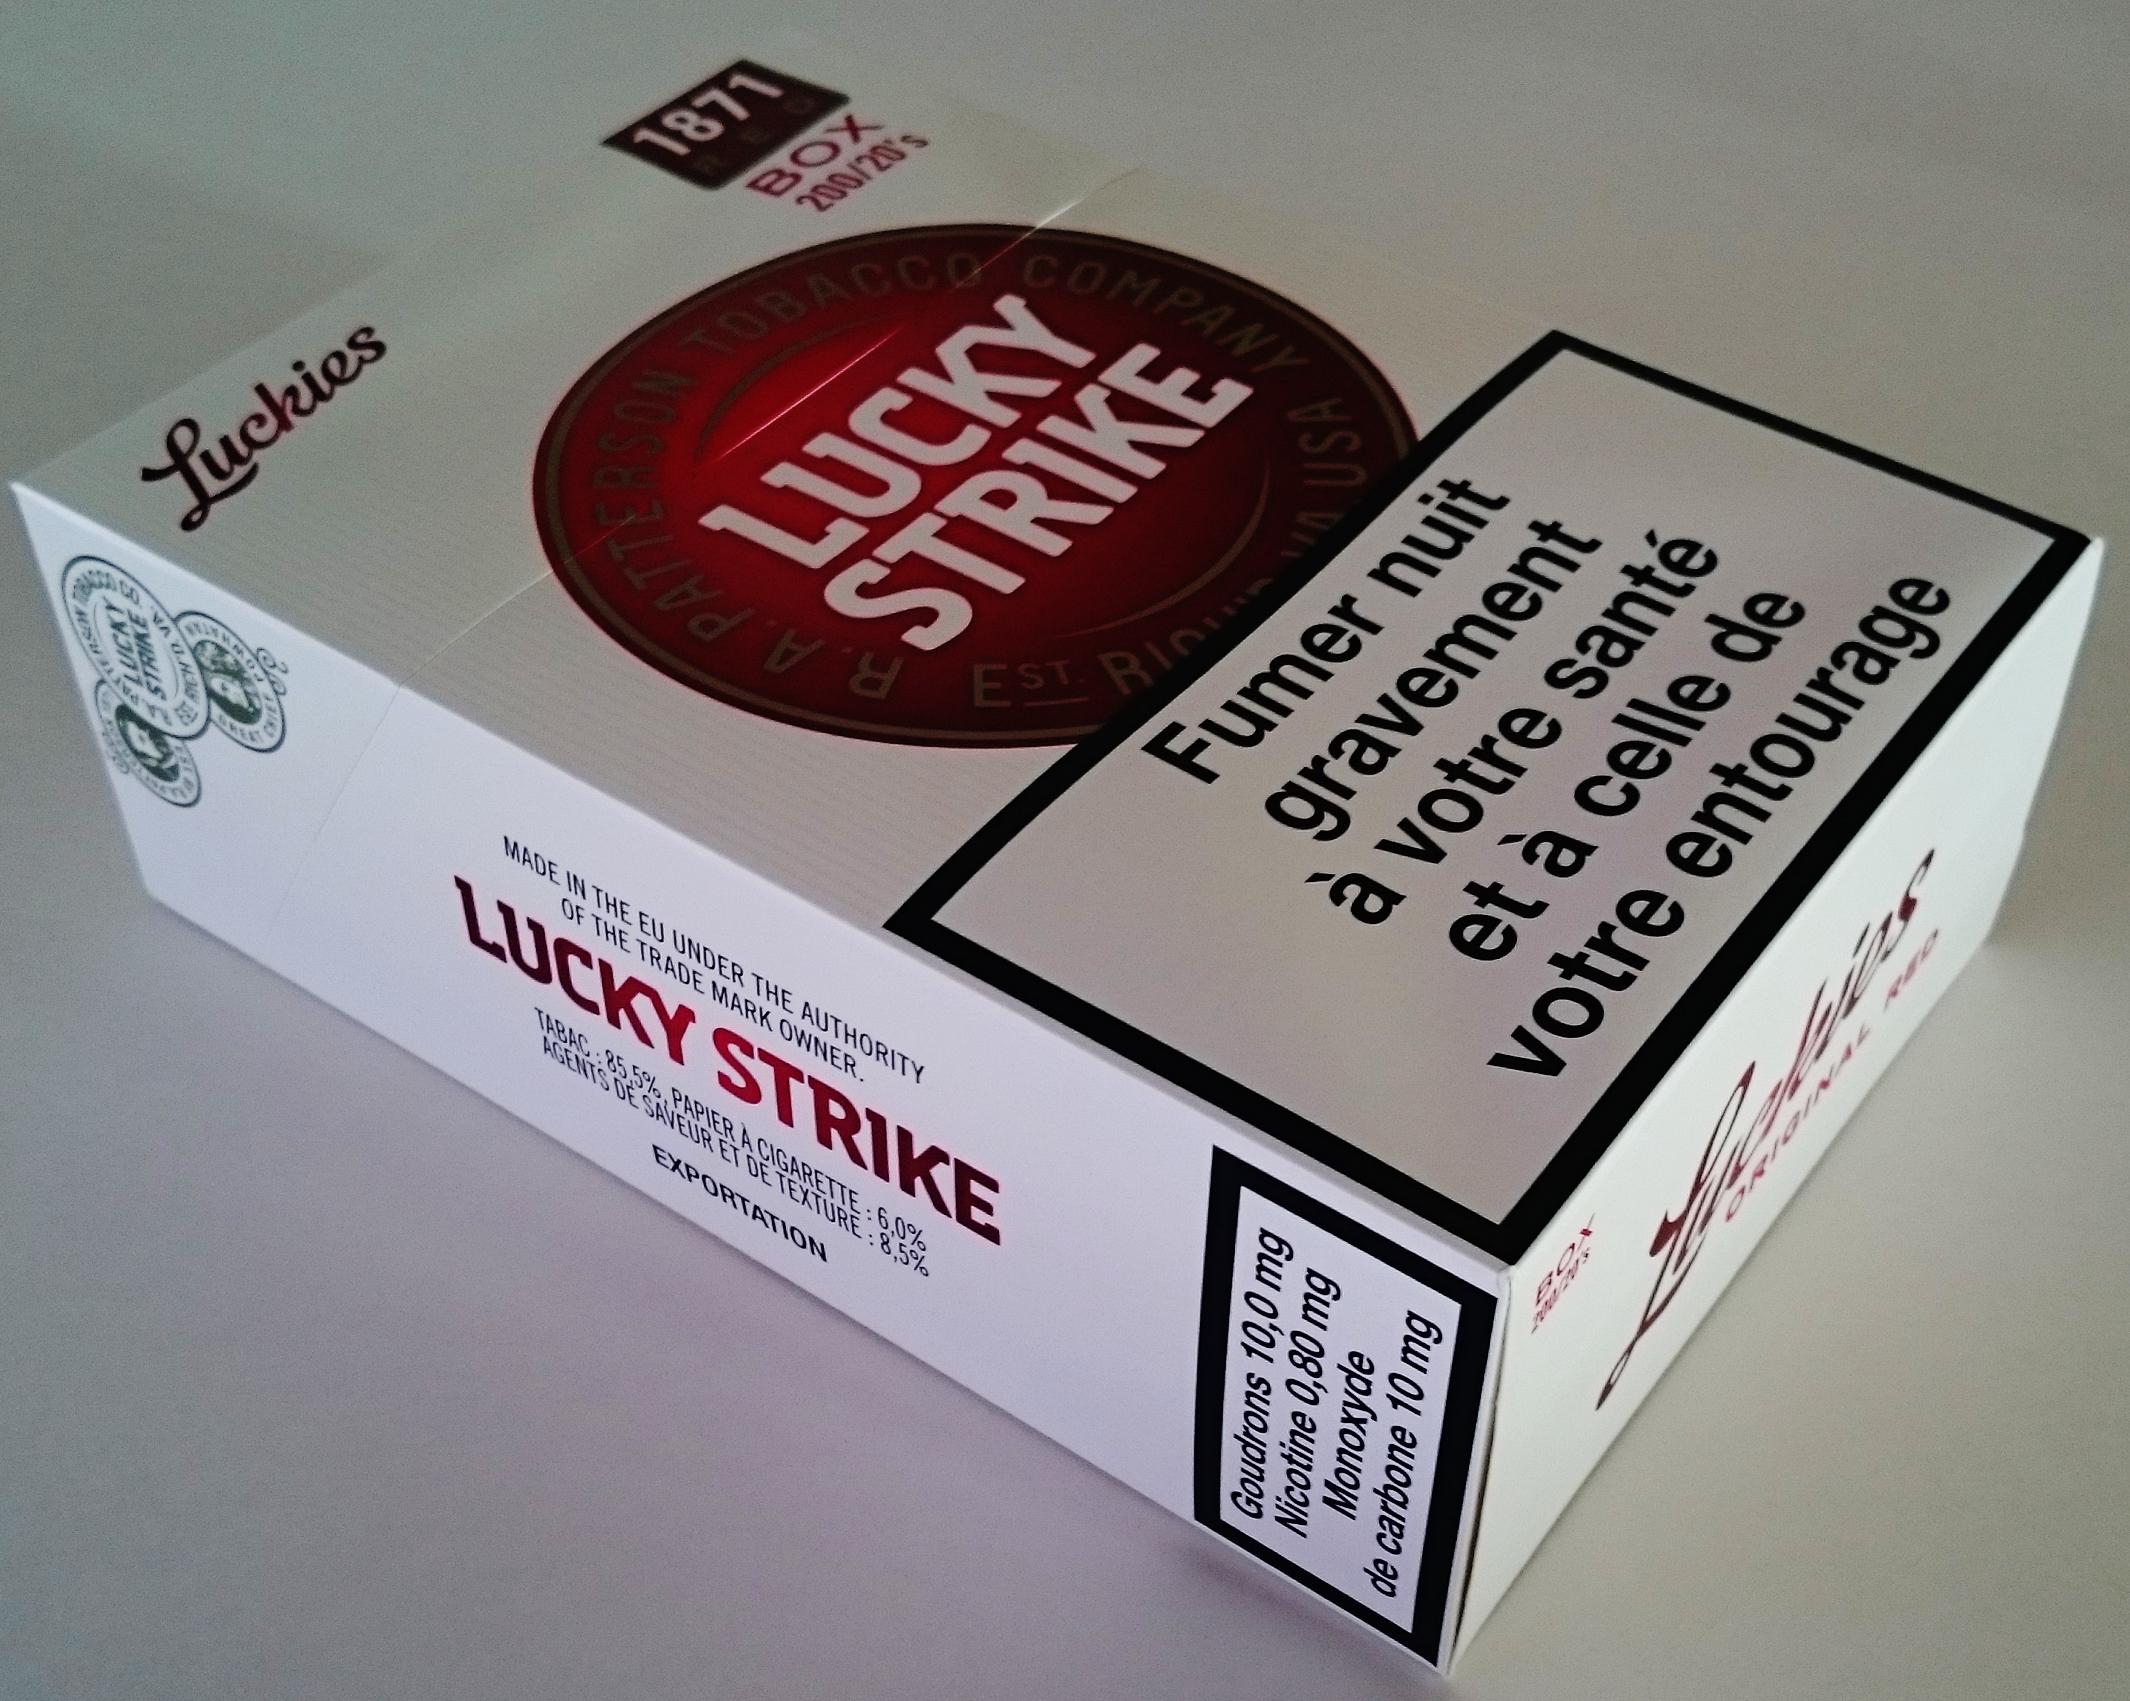 Lucky Strike Red cigarettes - Buy cigarettes, cigars, rolling tobacco and save money